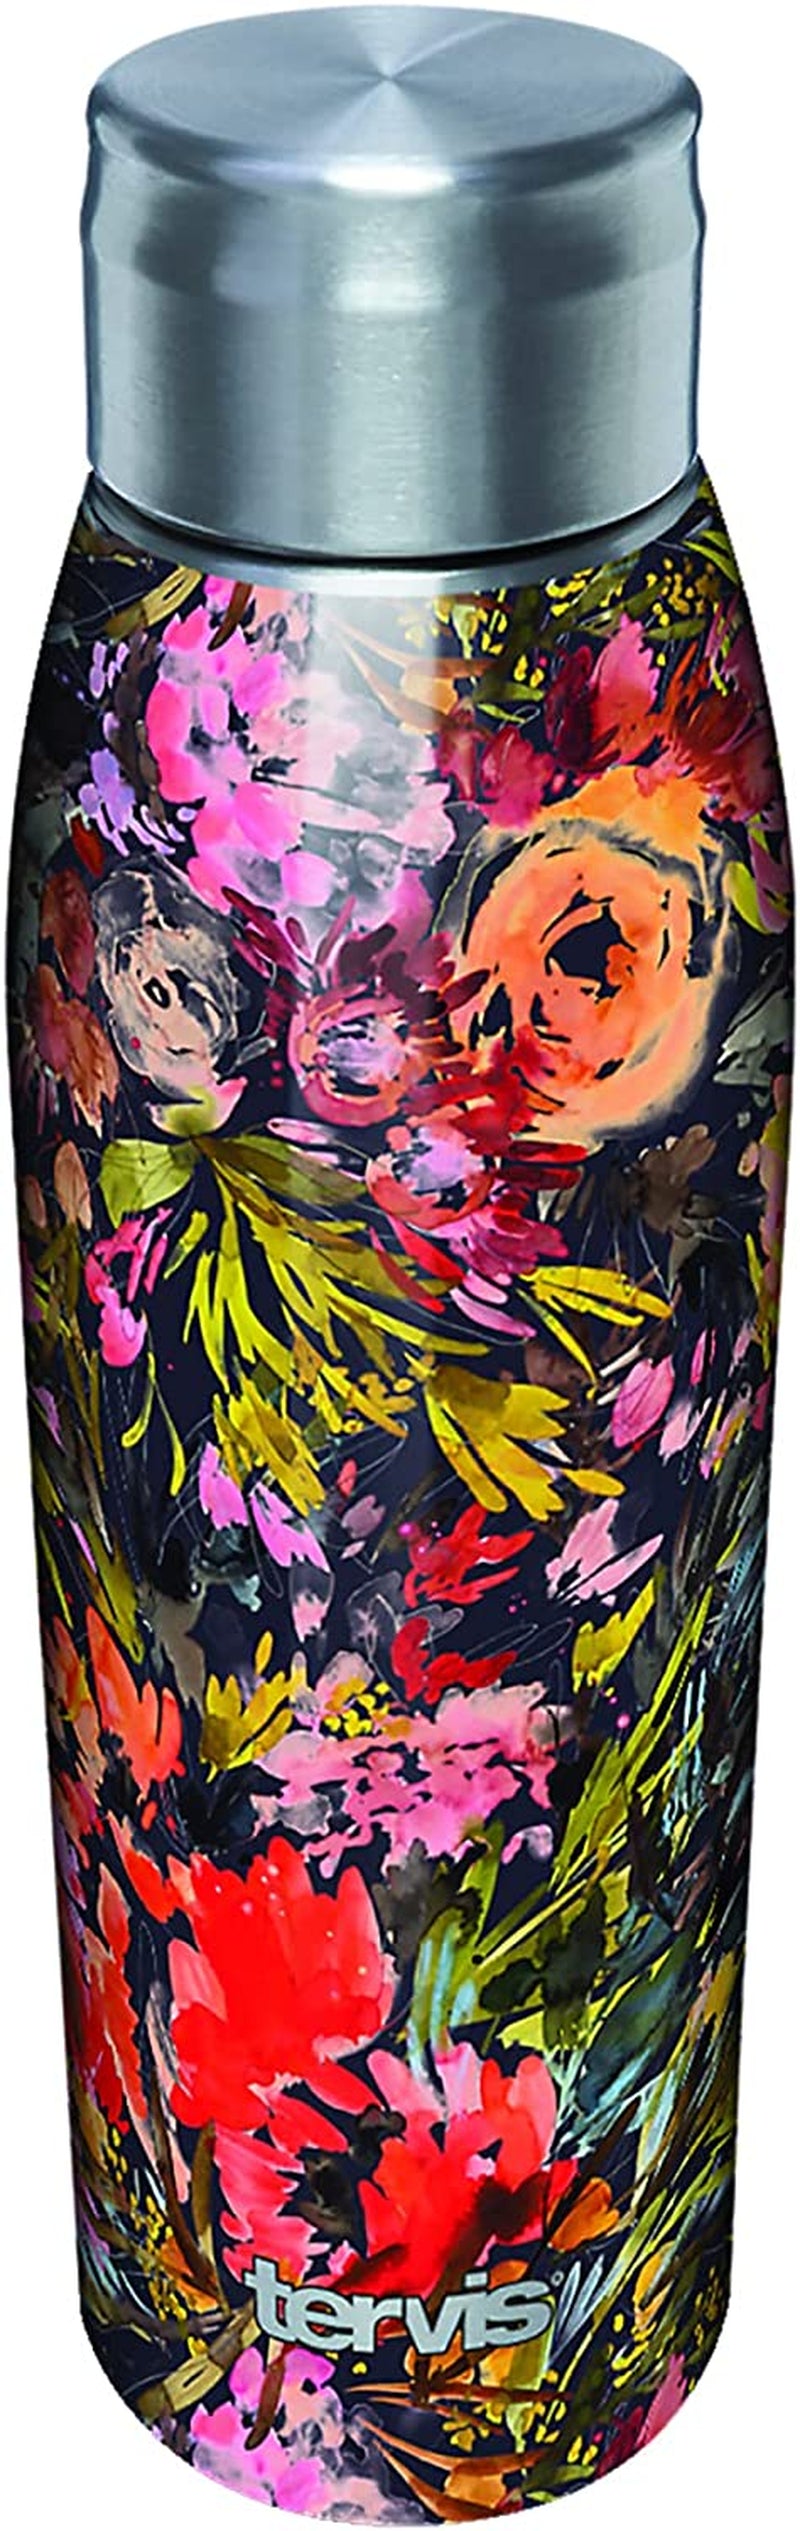 Tervis Made in USA Double Walled Kelly Ventura Floral Collection Insulated Tumbler Cup Keeps Drinks Cold & Hot, 16Oz 4Pk - Classic, Assorted Home & Garden > Kitchen & Dining > Tableware > Drinkware Tervis Bright Floral 17oz Water Bottle - Stainless Steel 